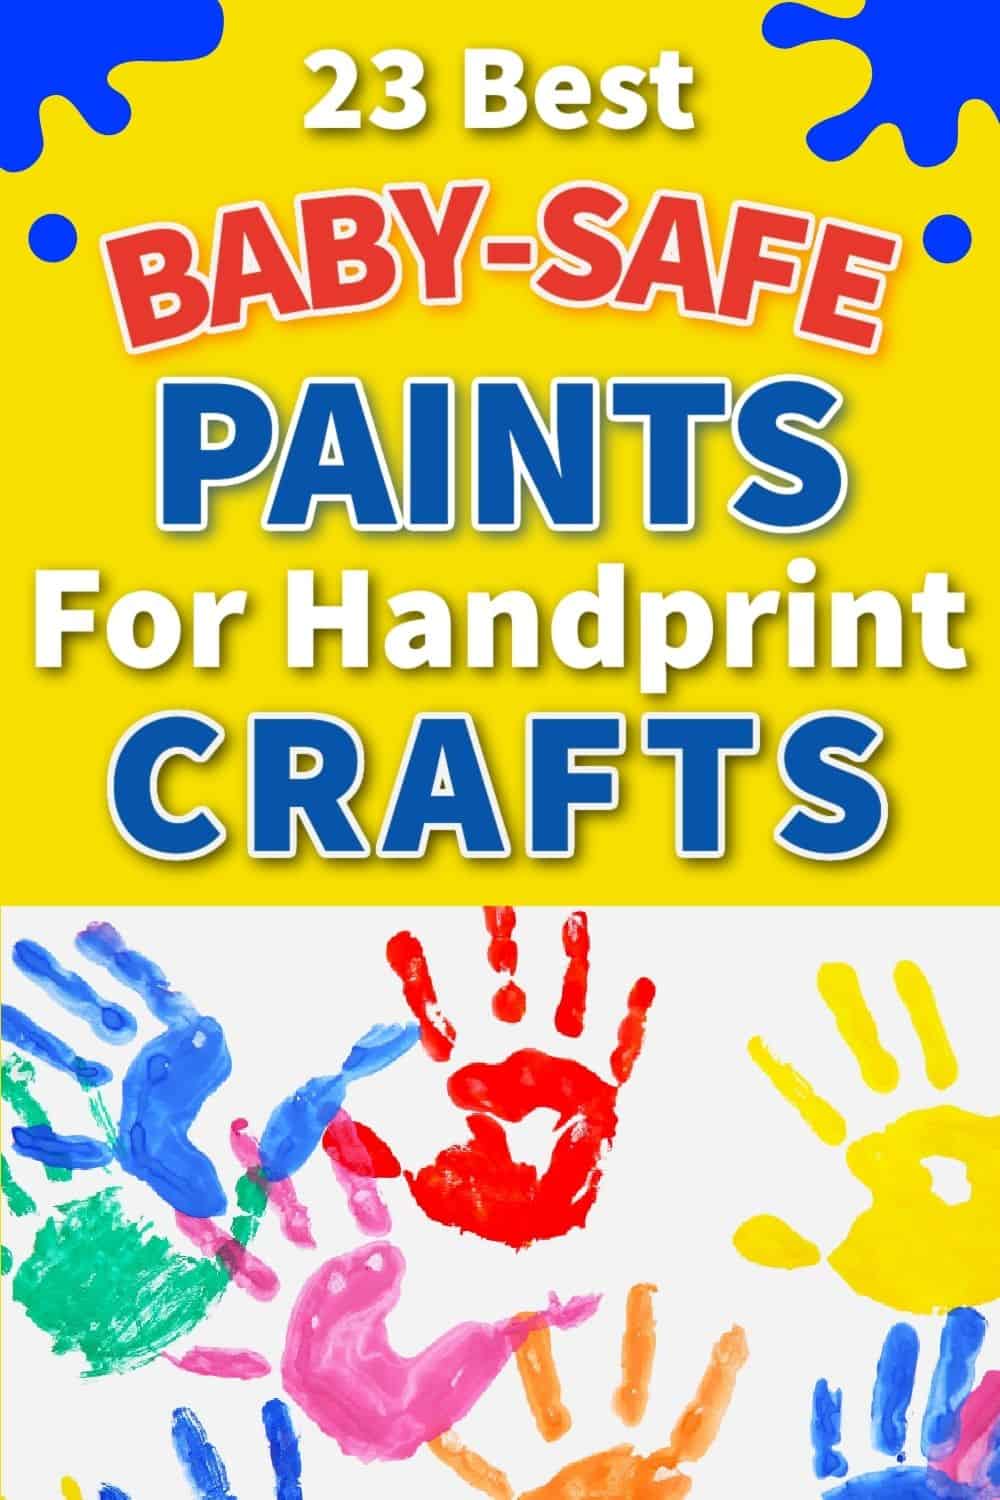 best baby-safe paints for handprint crafts feature image